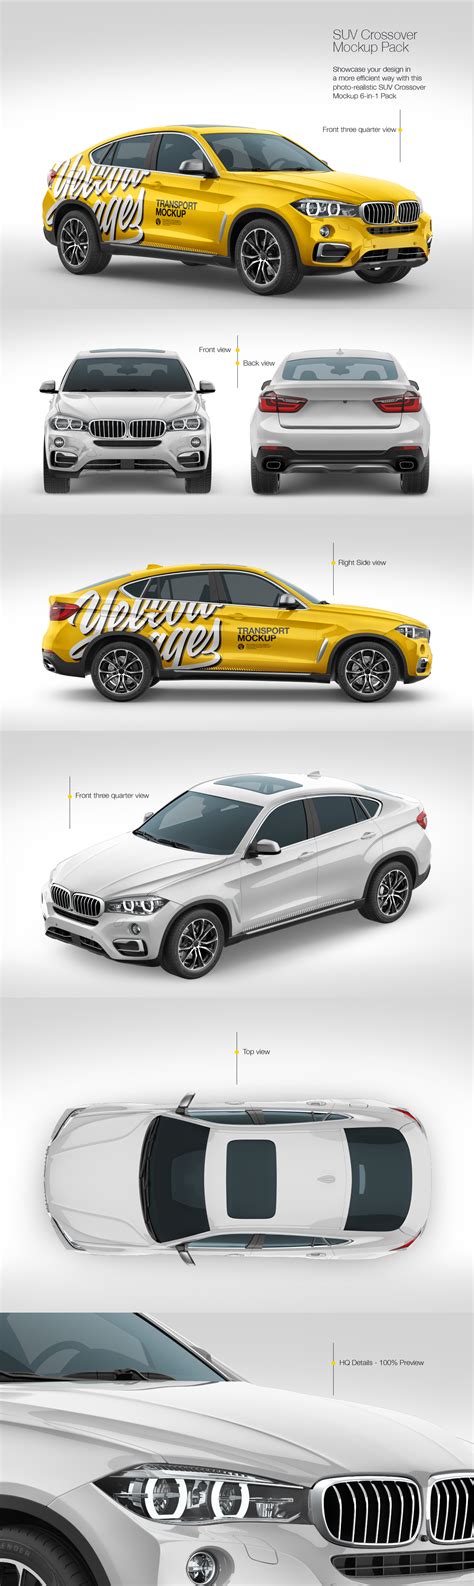 Suv Crossover Car Mockup Pack On Yellow Images Creative Store